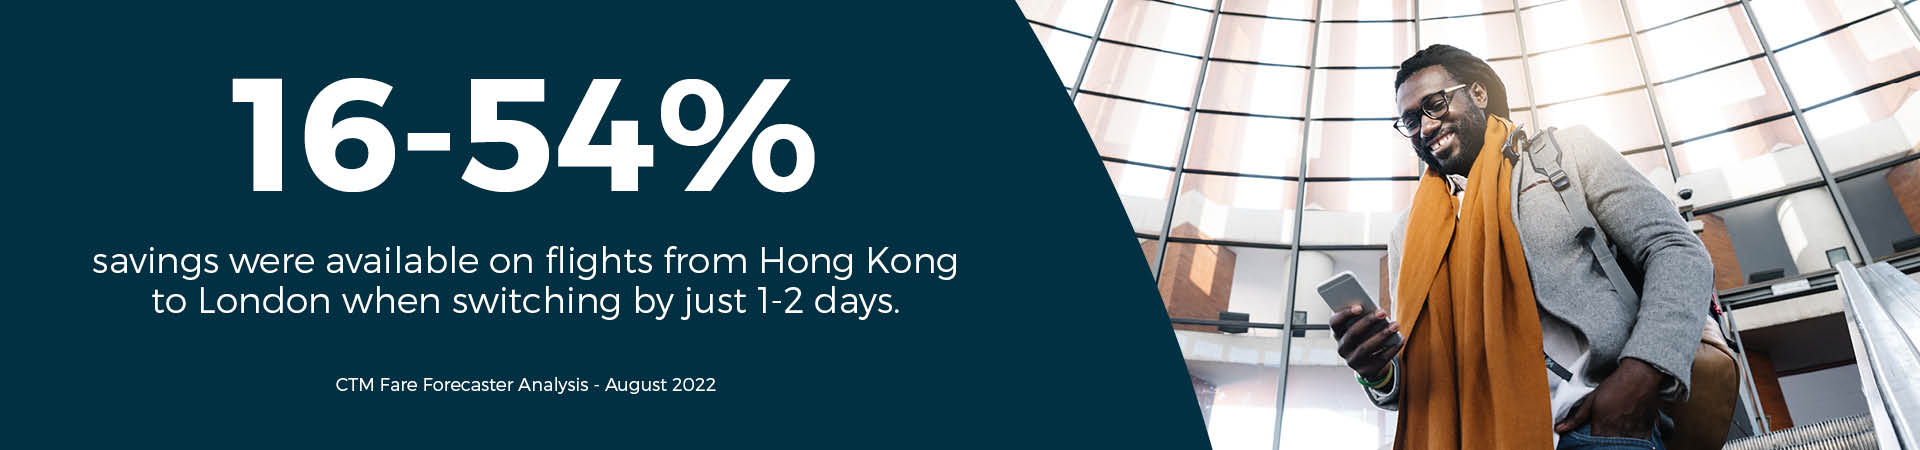 Banner - "16-54% savings were available on flights from Hong Kong to London when switching by just 1-2 days"